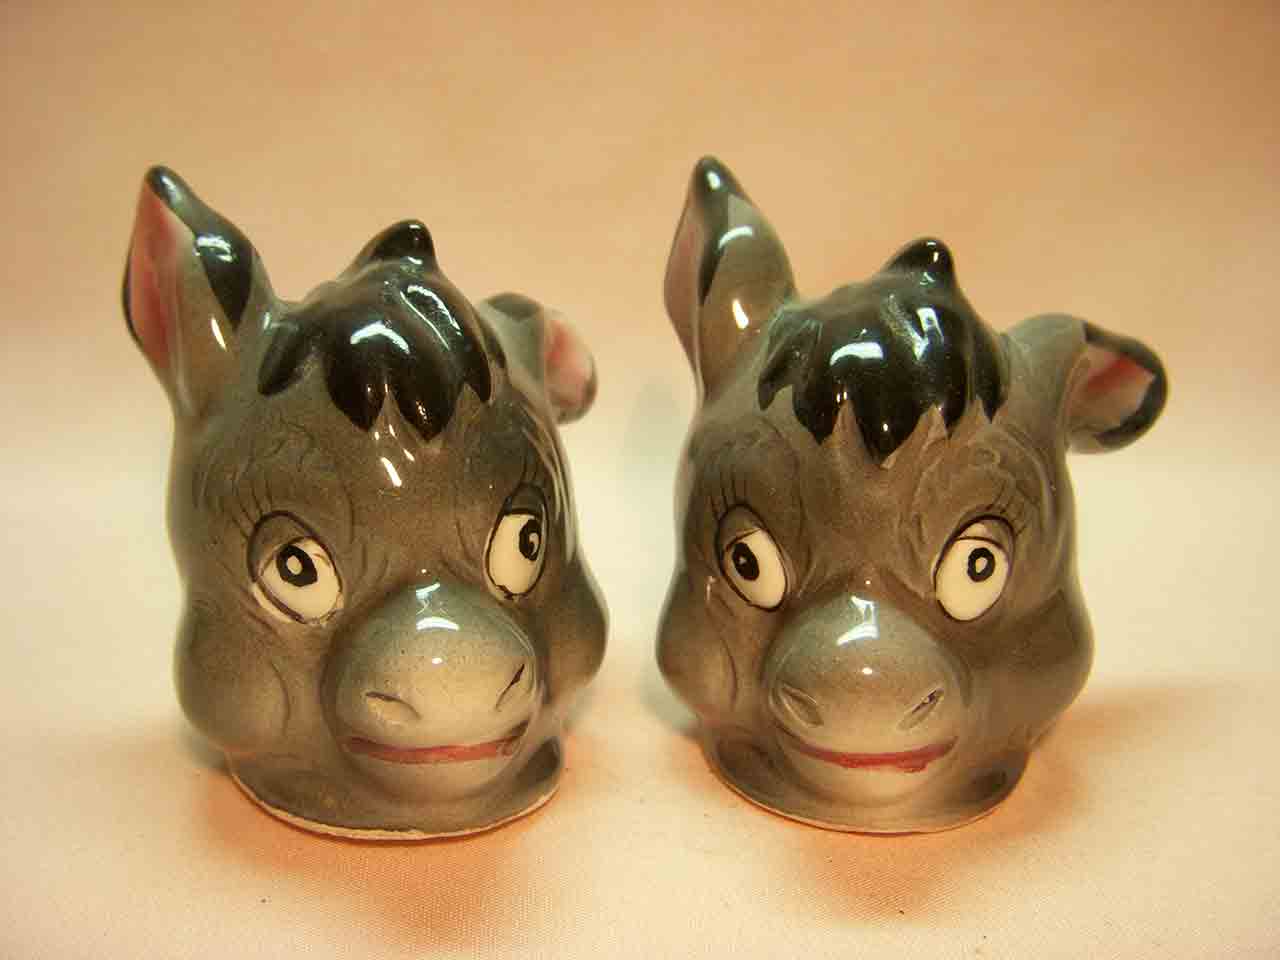 Characters from MGM Studios salt and pepper shakers - Pepe